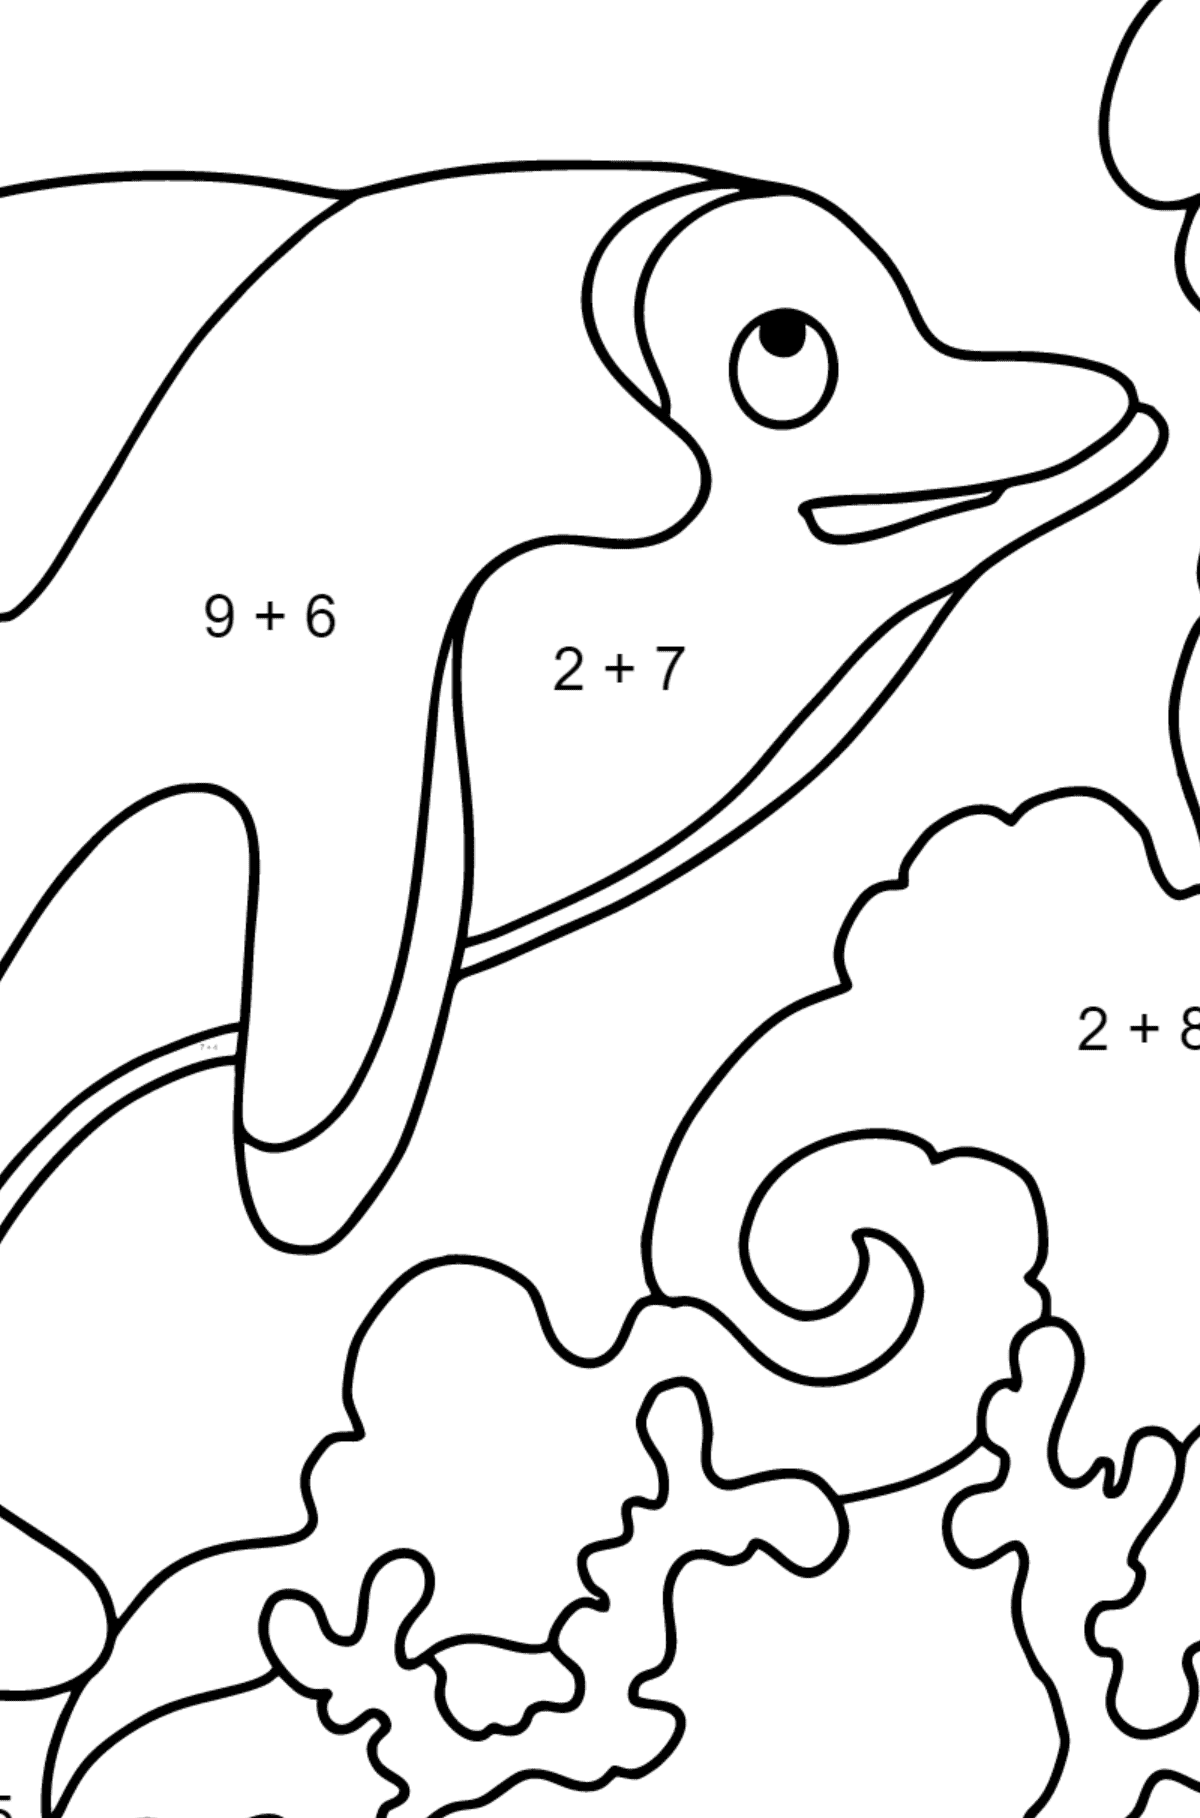 Coloring Page - A Dolphin, a Smart and Friendly Animal - Math Coloring - Addition for Kids